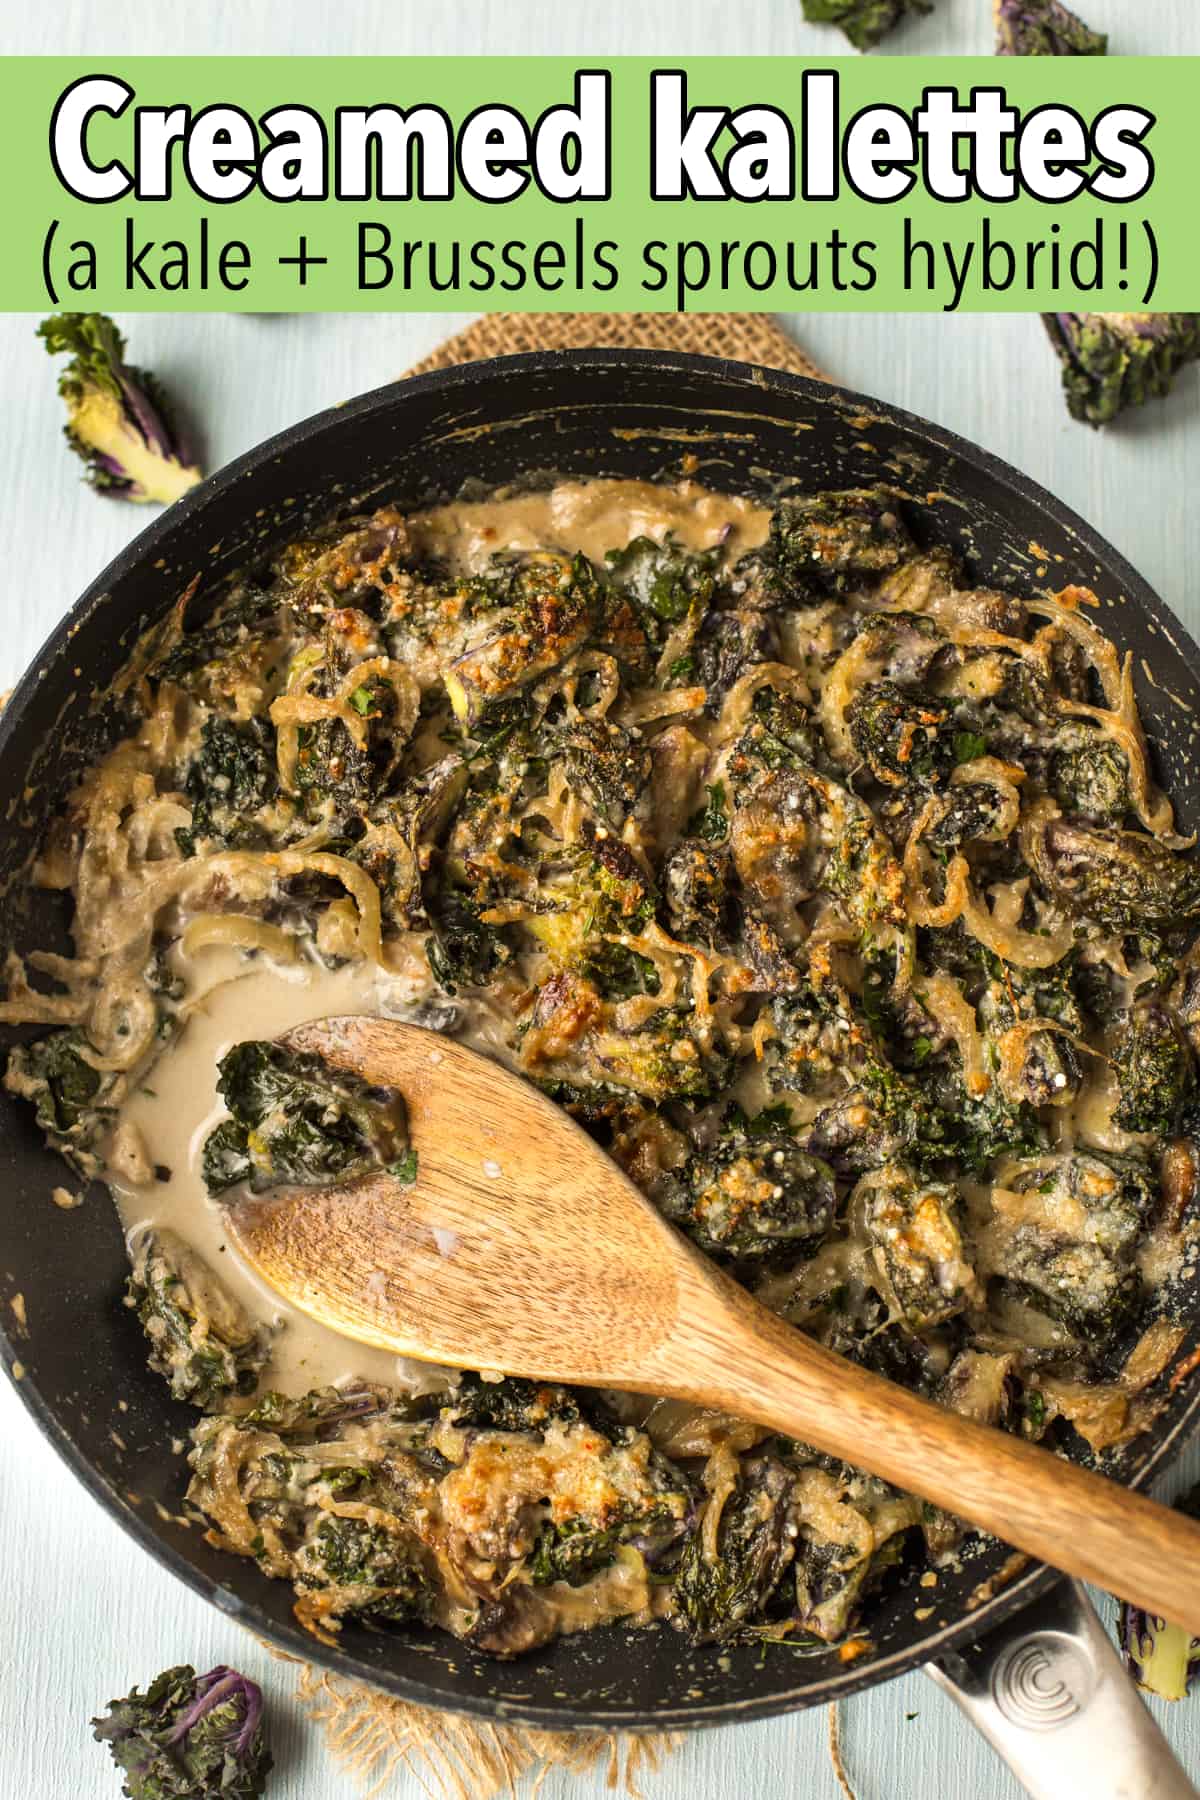 A pan of creamed kalettes with a wooden spoon.